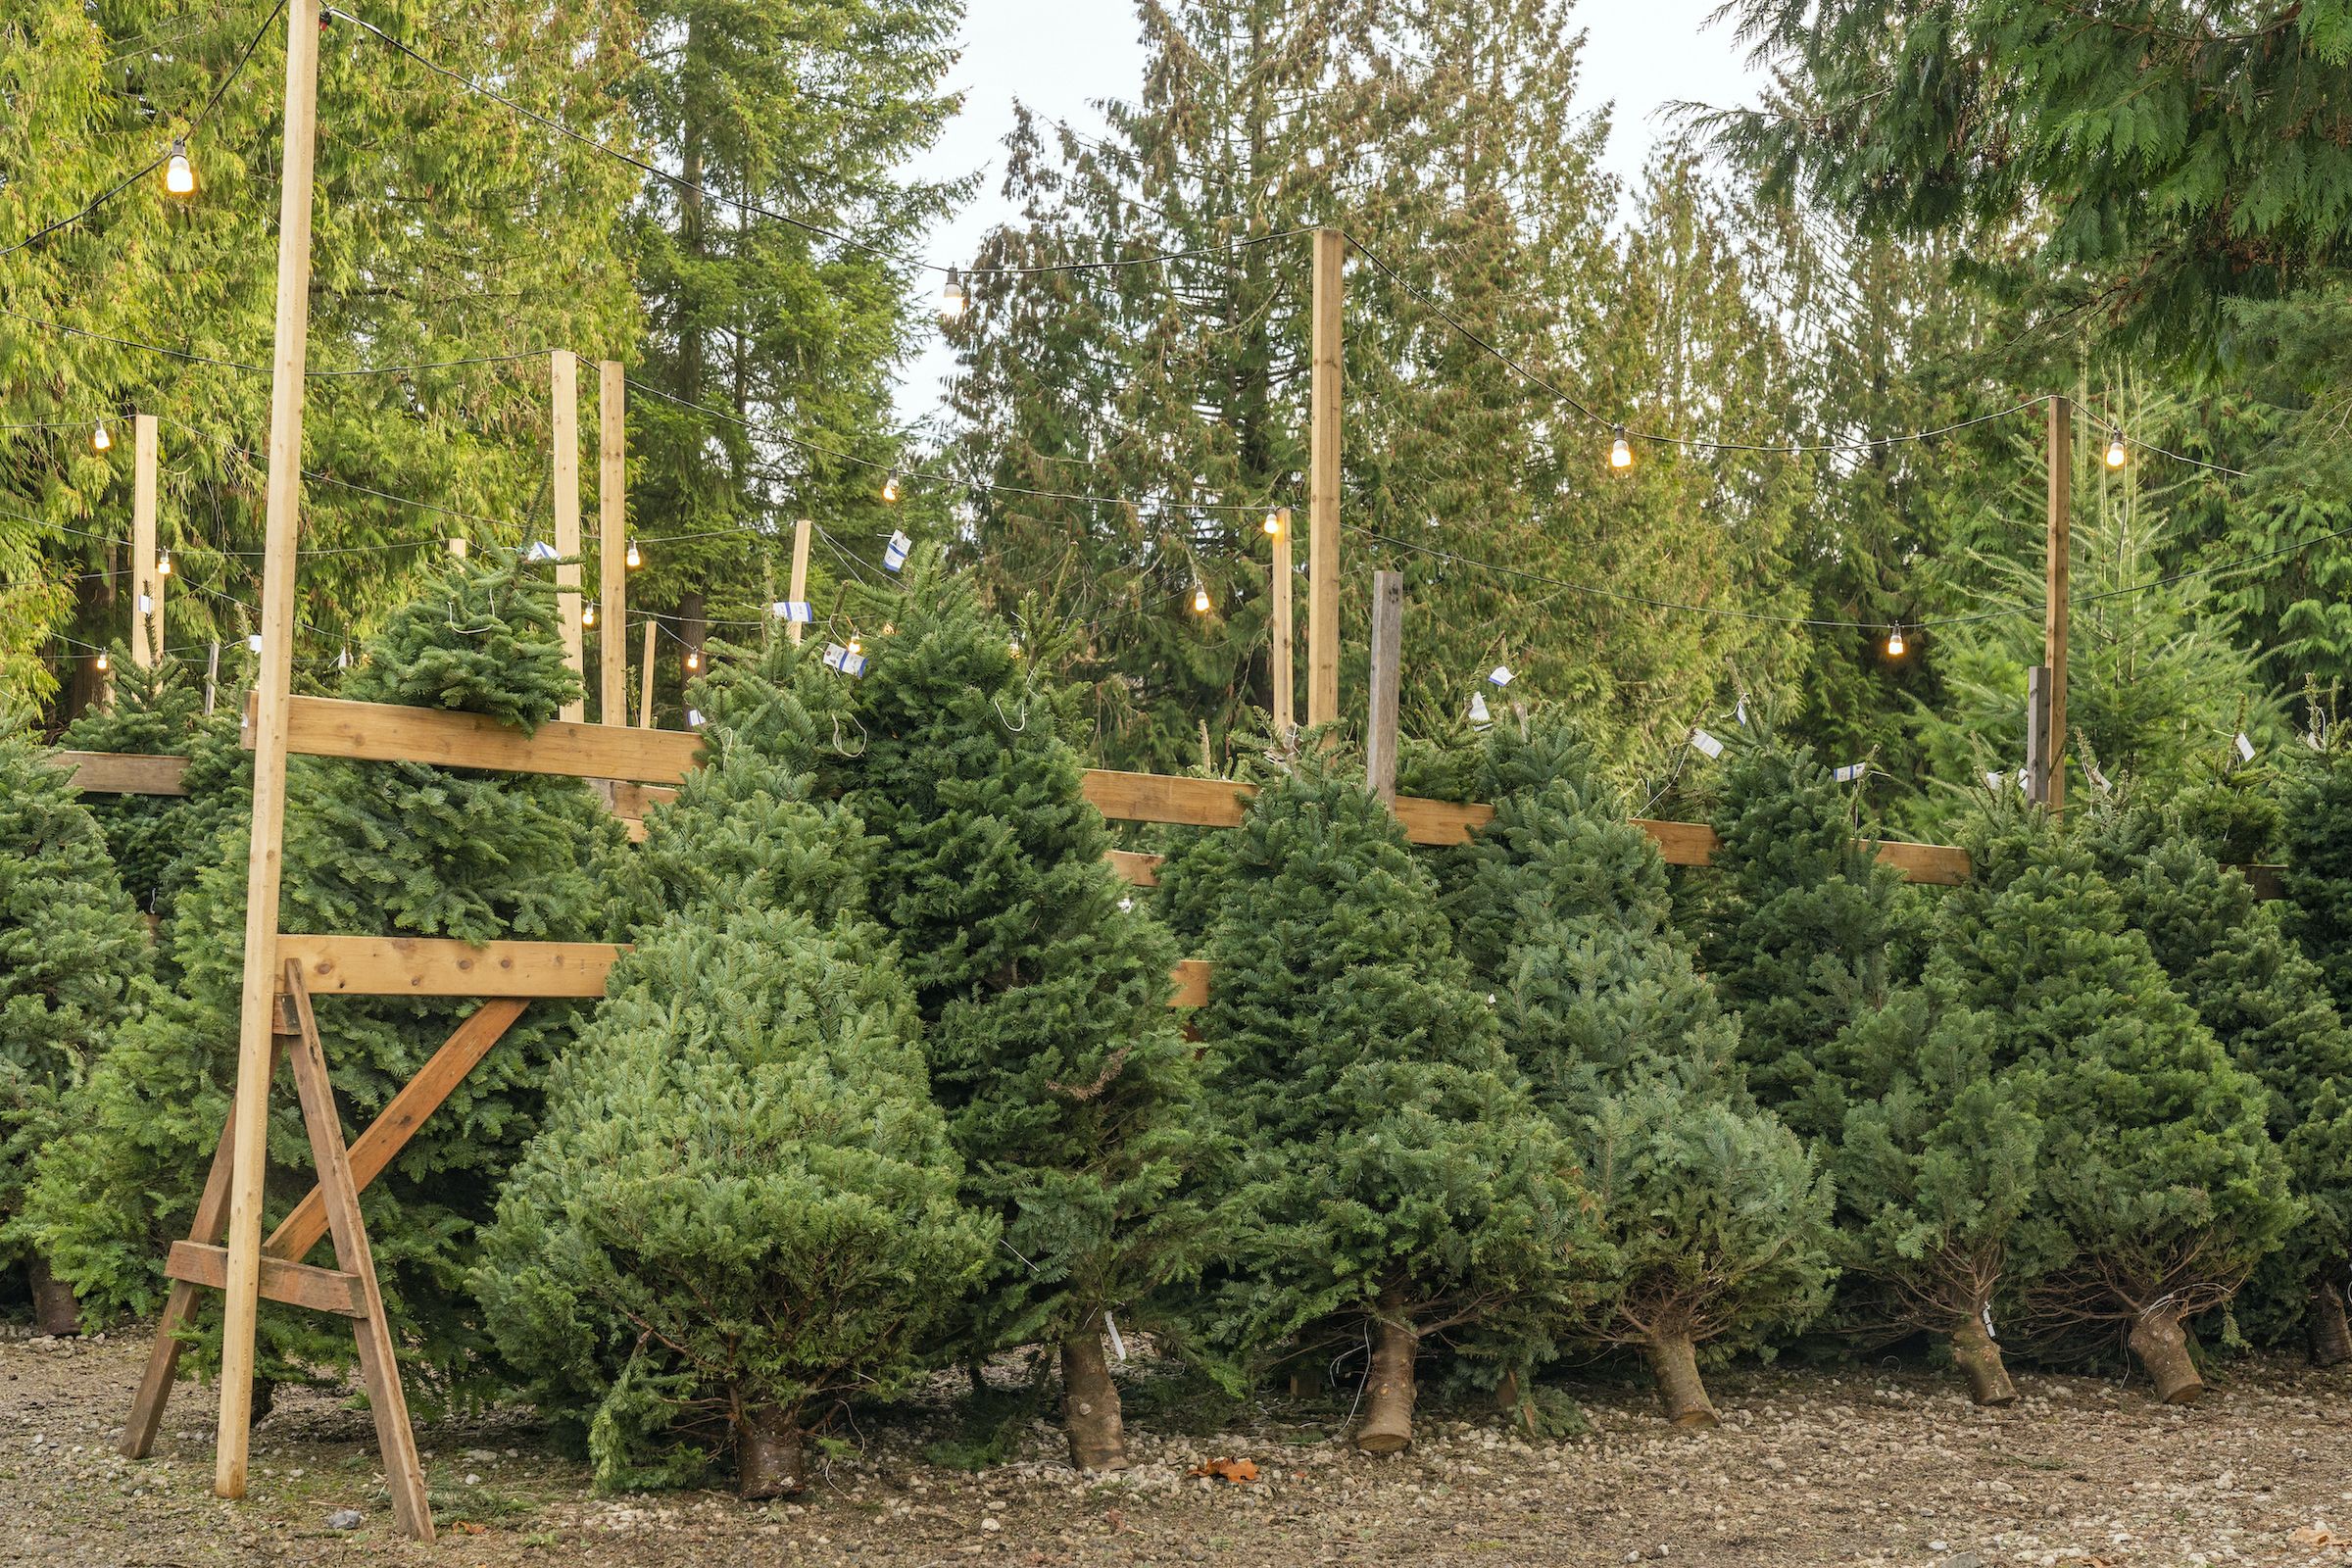 How To Buy A Christmas Tree?